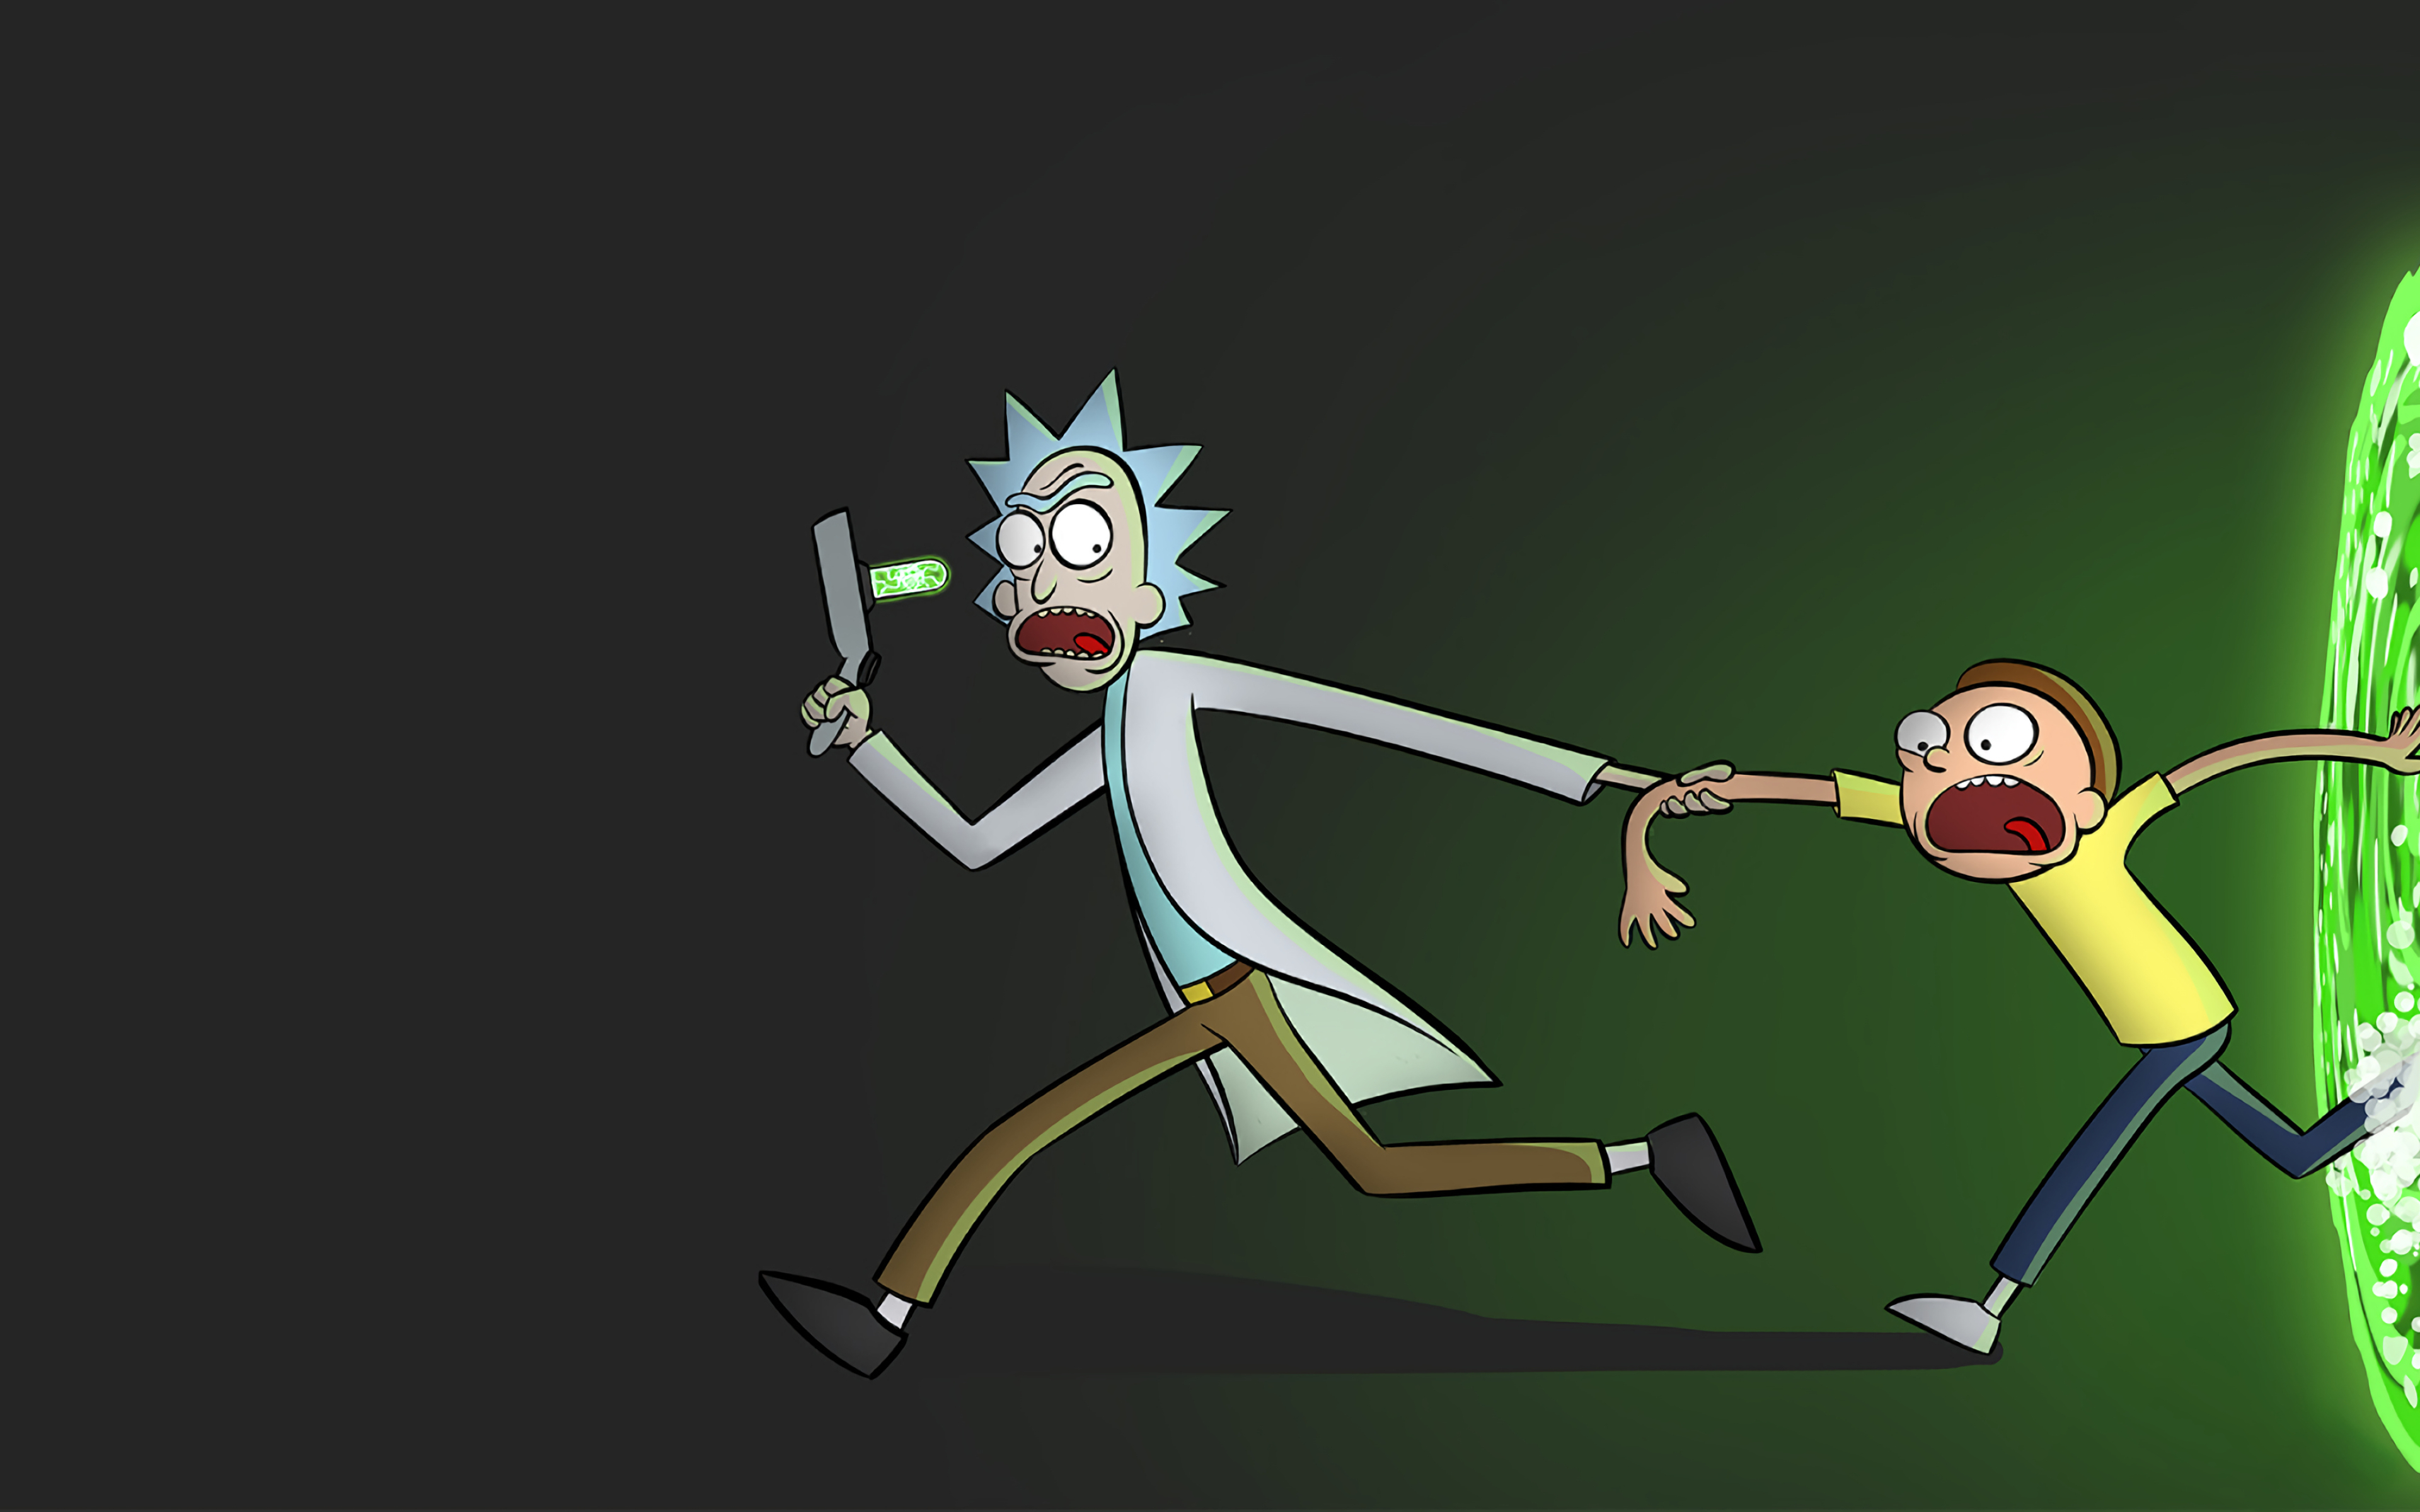 [15+] Astonishing Rick And Morty Black Wallpapers - Wallpaper Access